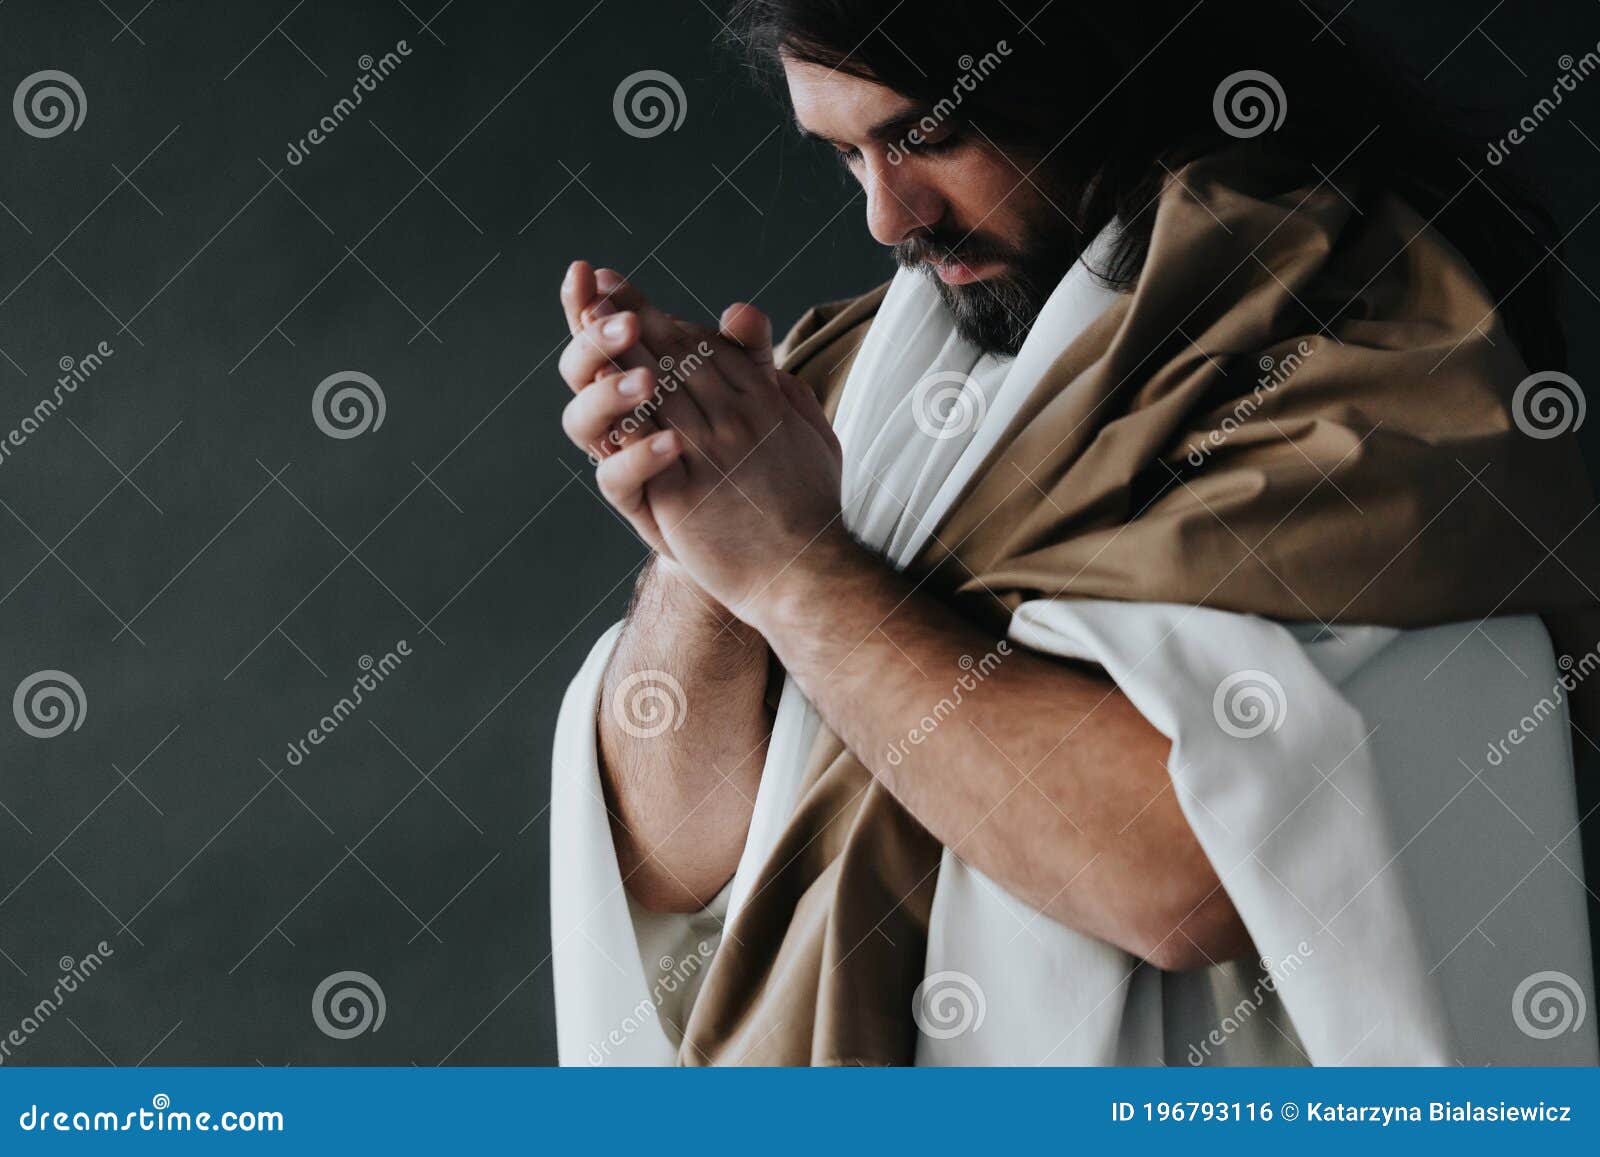 jesus christ in robes